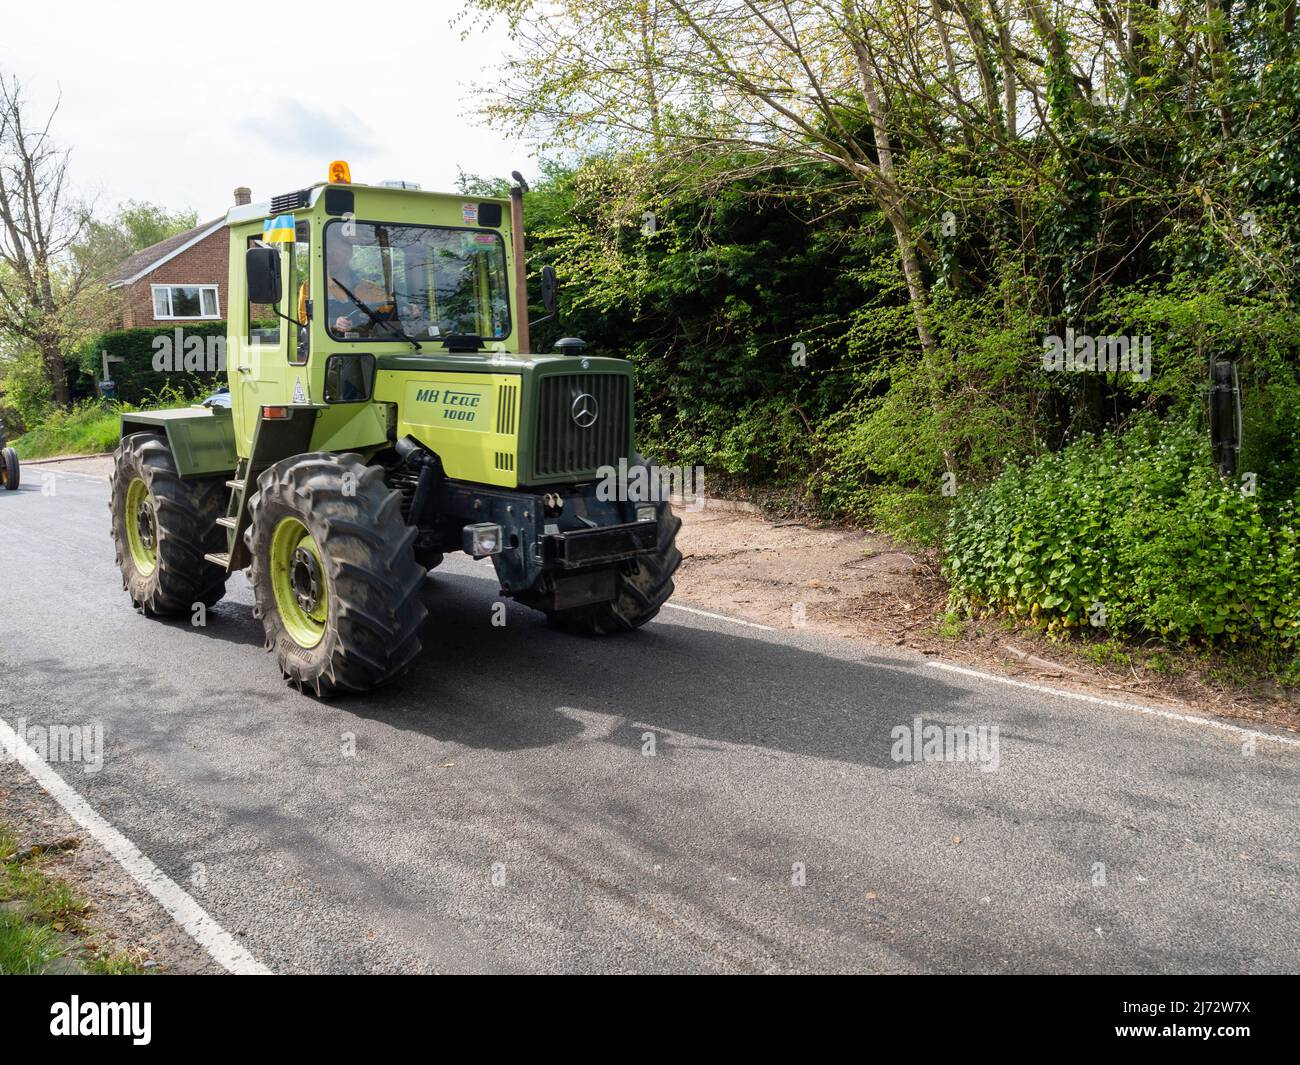 Gt. Bardfield Braintee Essex UK, 2nd May 2022. Stebbing Tractor Run an annual event where old tractors are driven through the Essex countryside.  Tractors are used to pull farm implements. copyright Willliam Edwards/Alamy Stock Photo